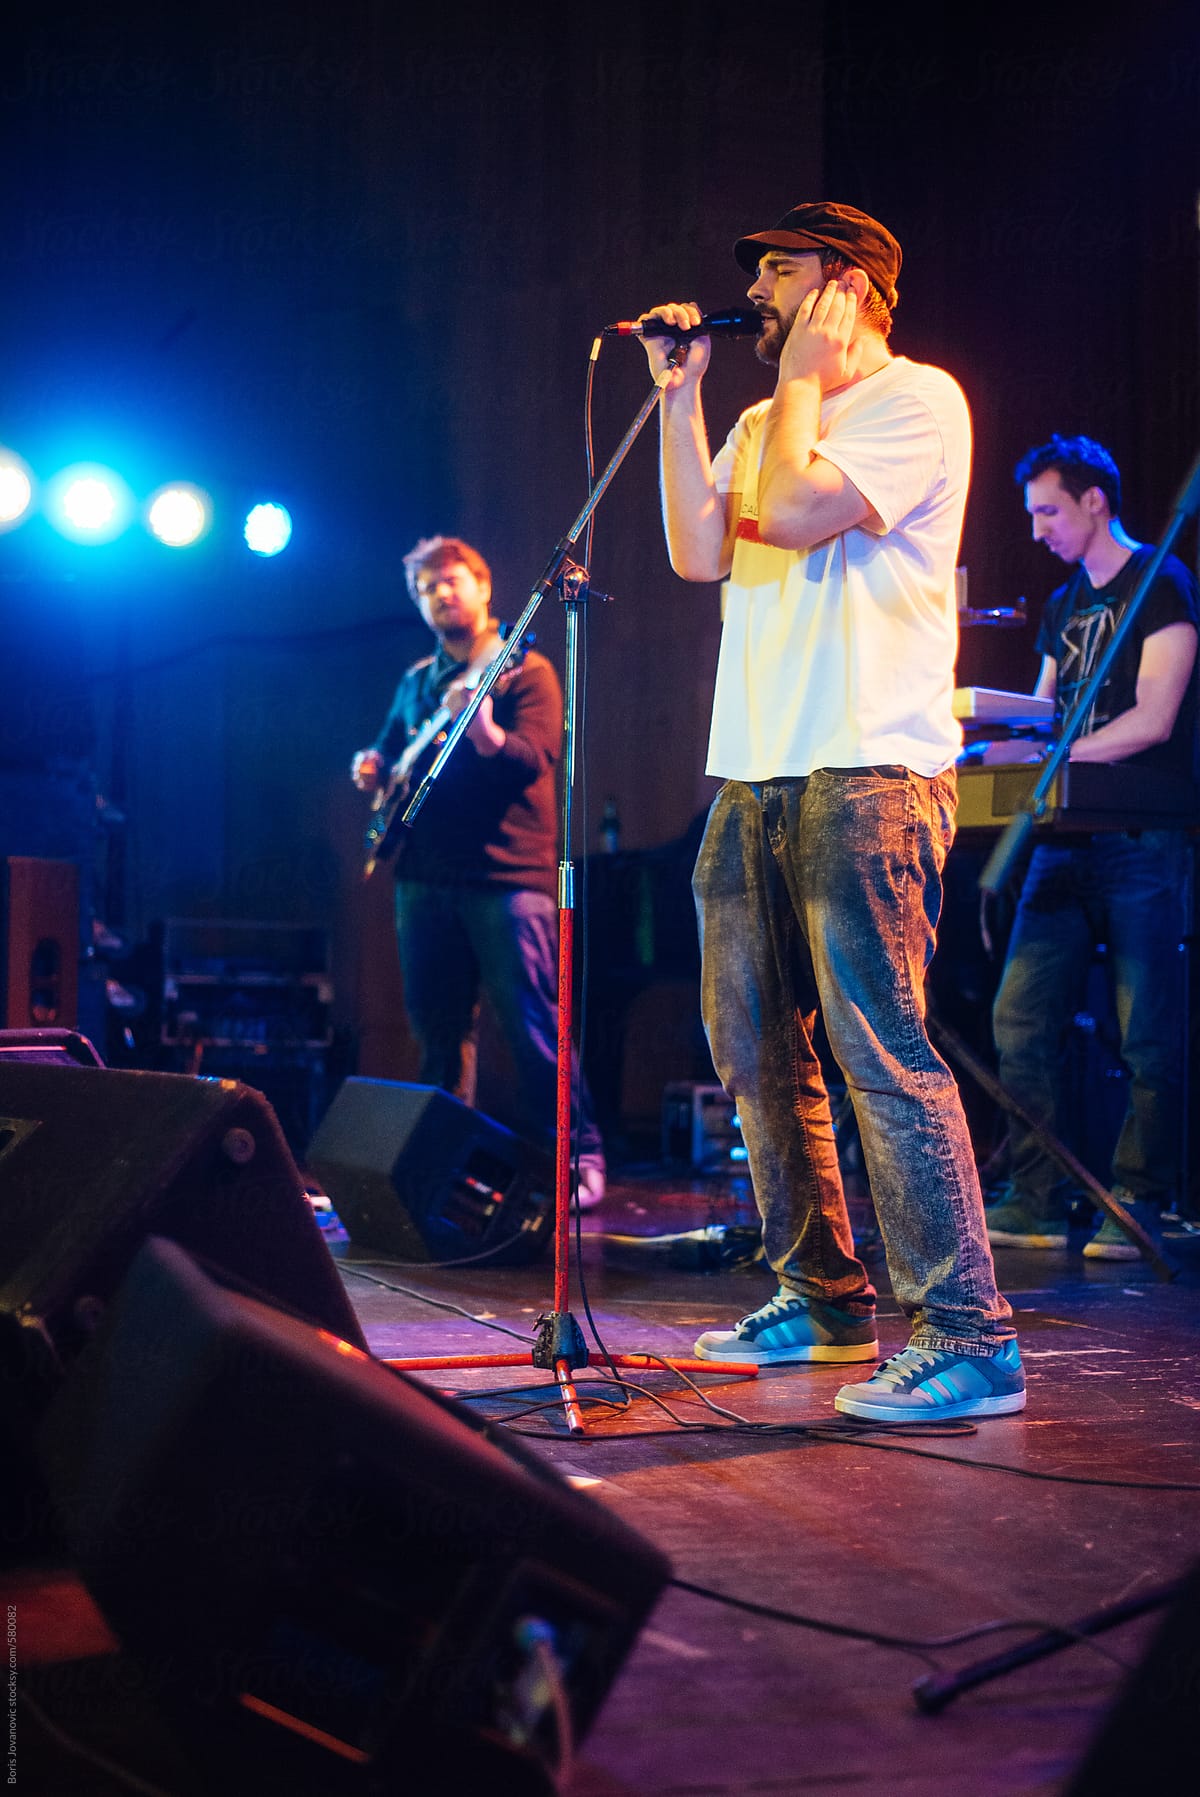 Young man singing on stage with his band